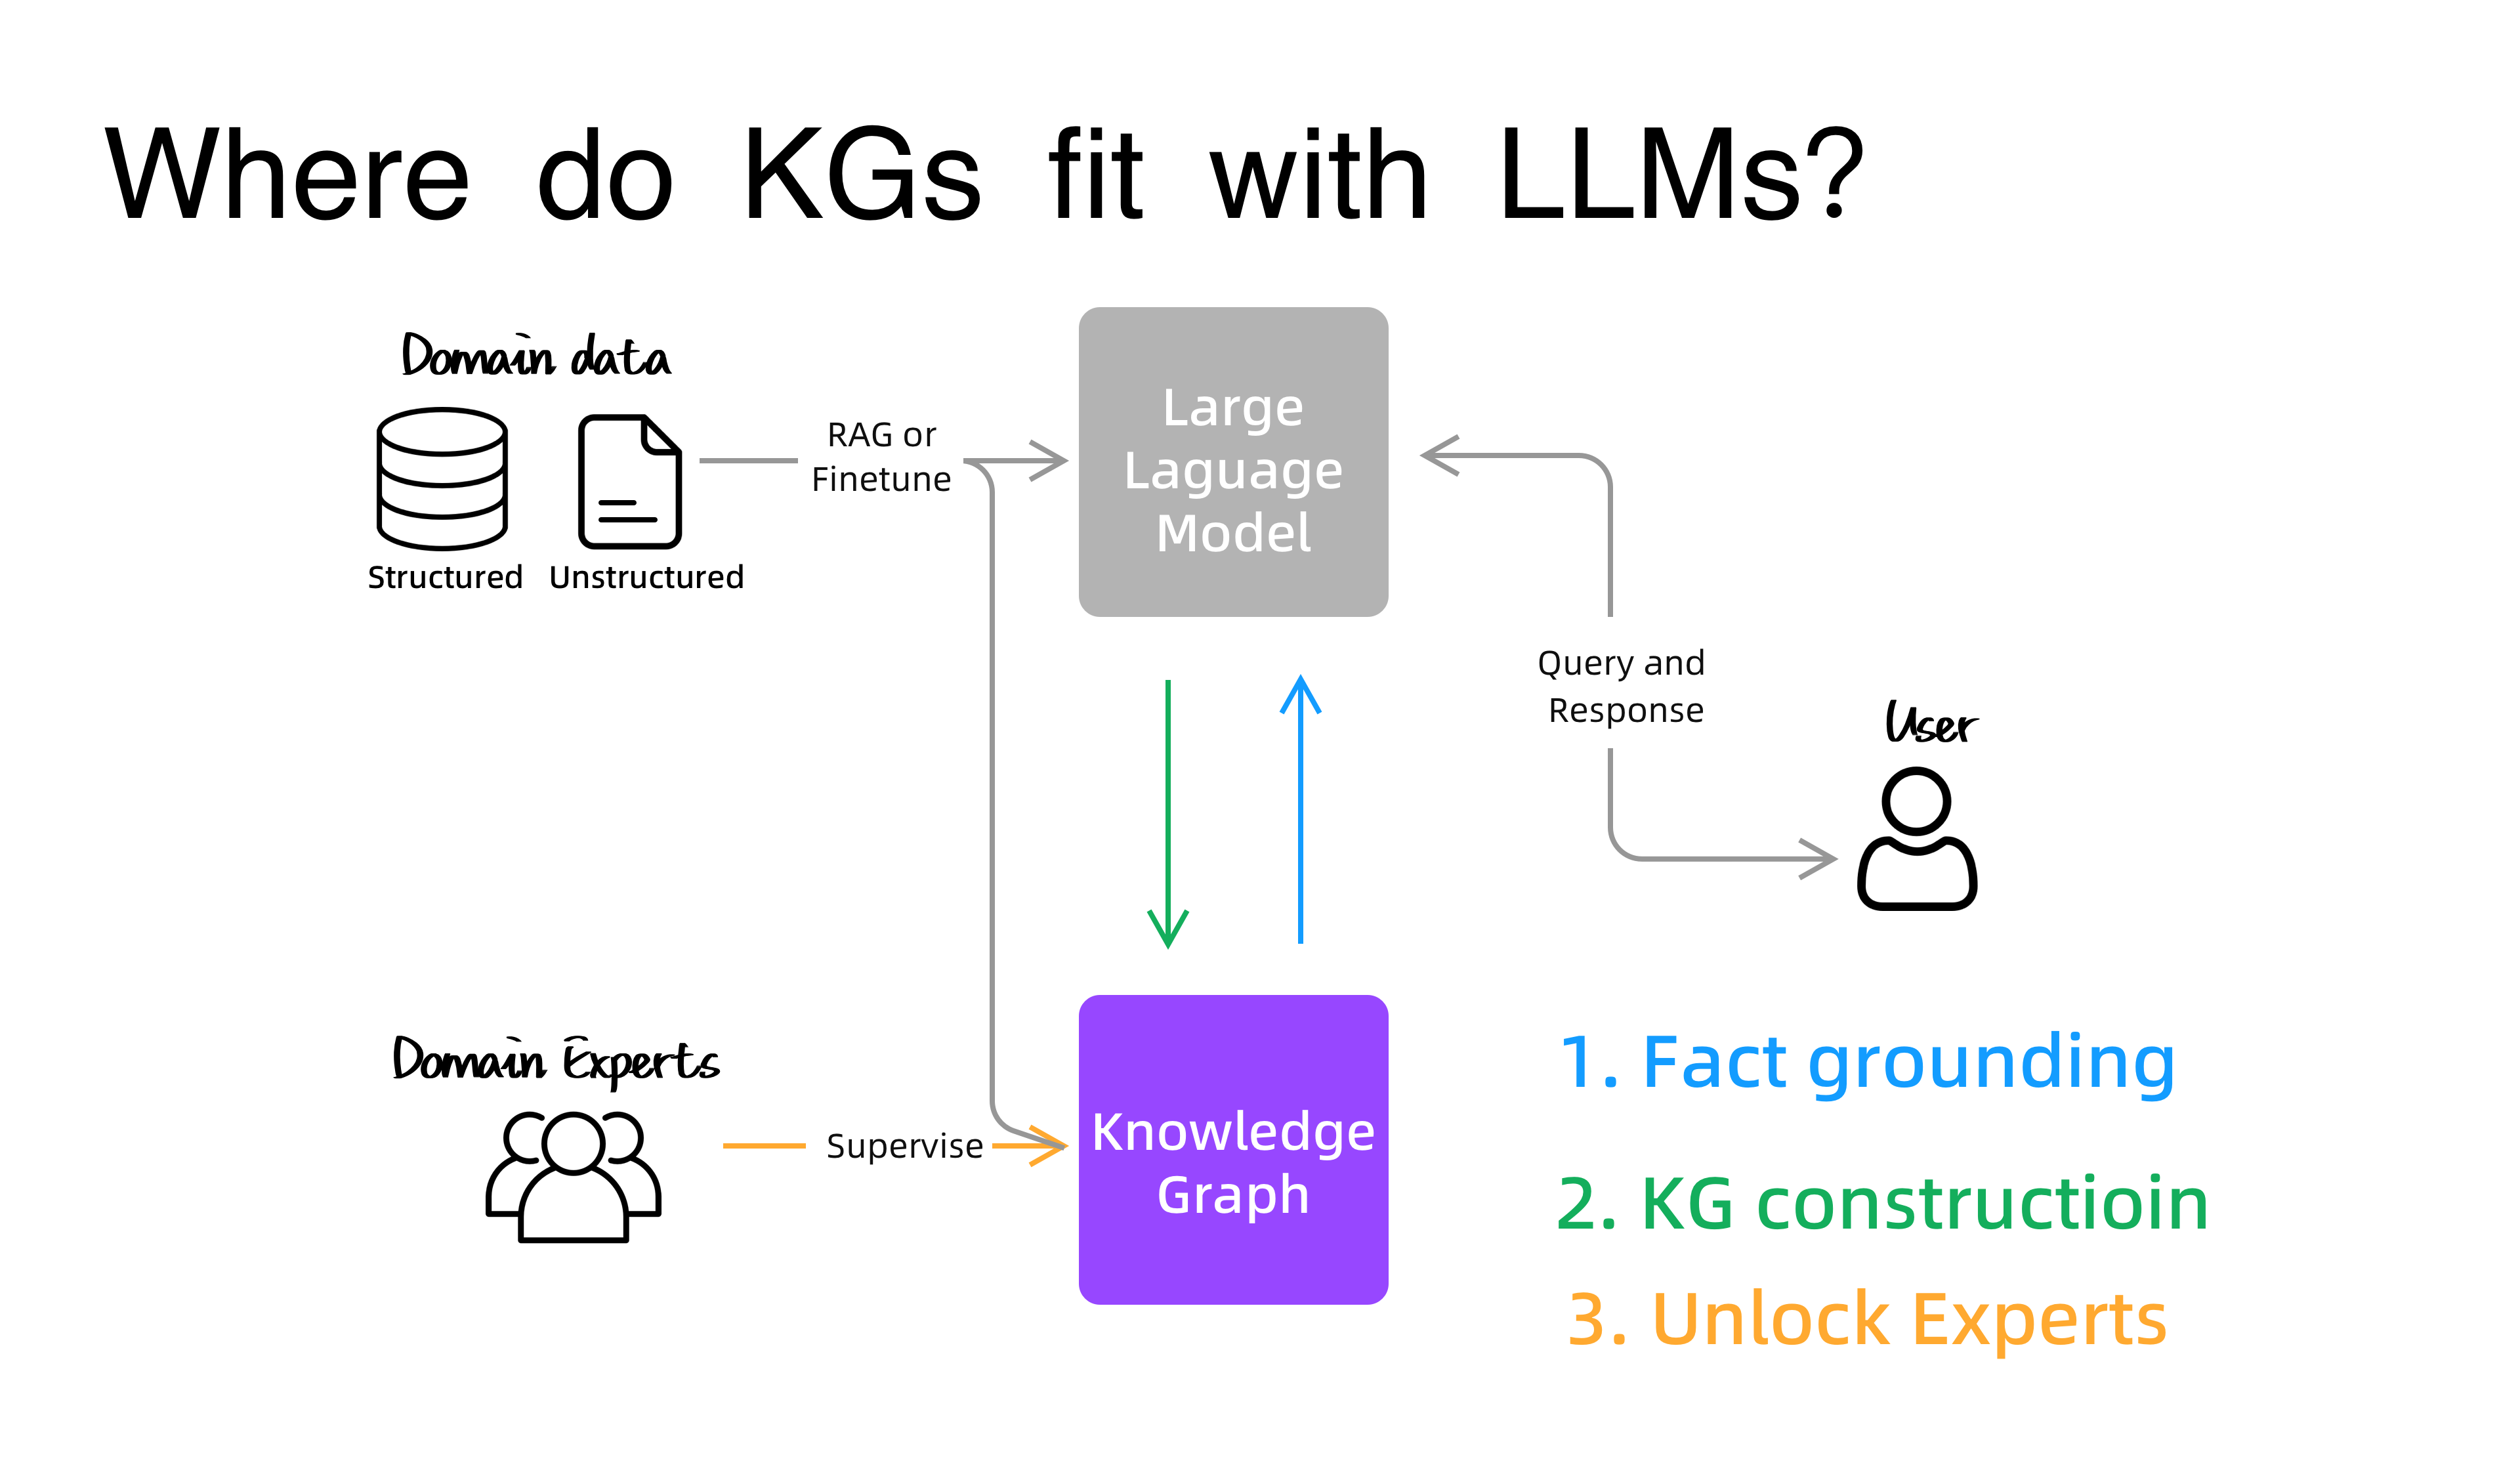 Where do Knowledge Graphs fit with Large Language Models?